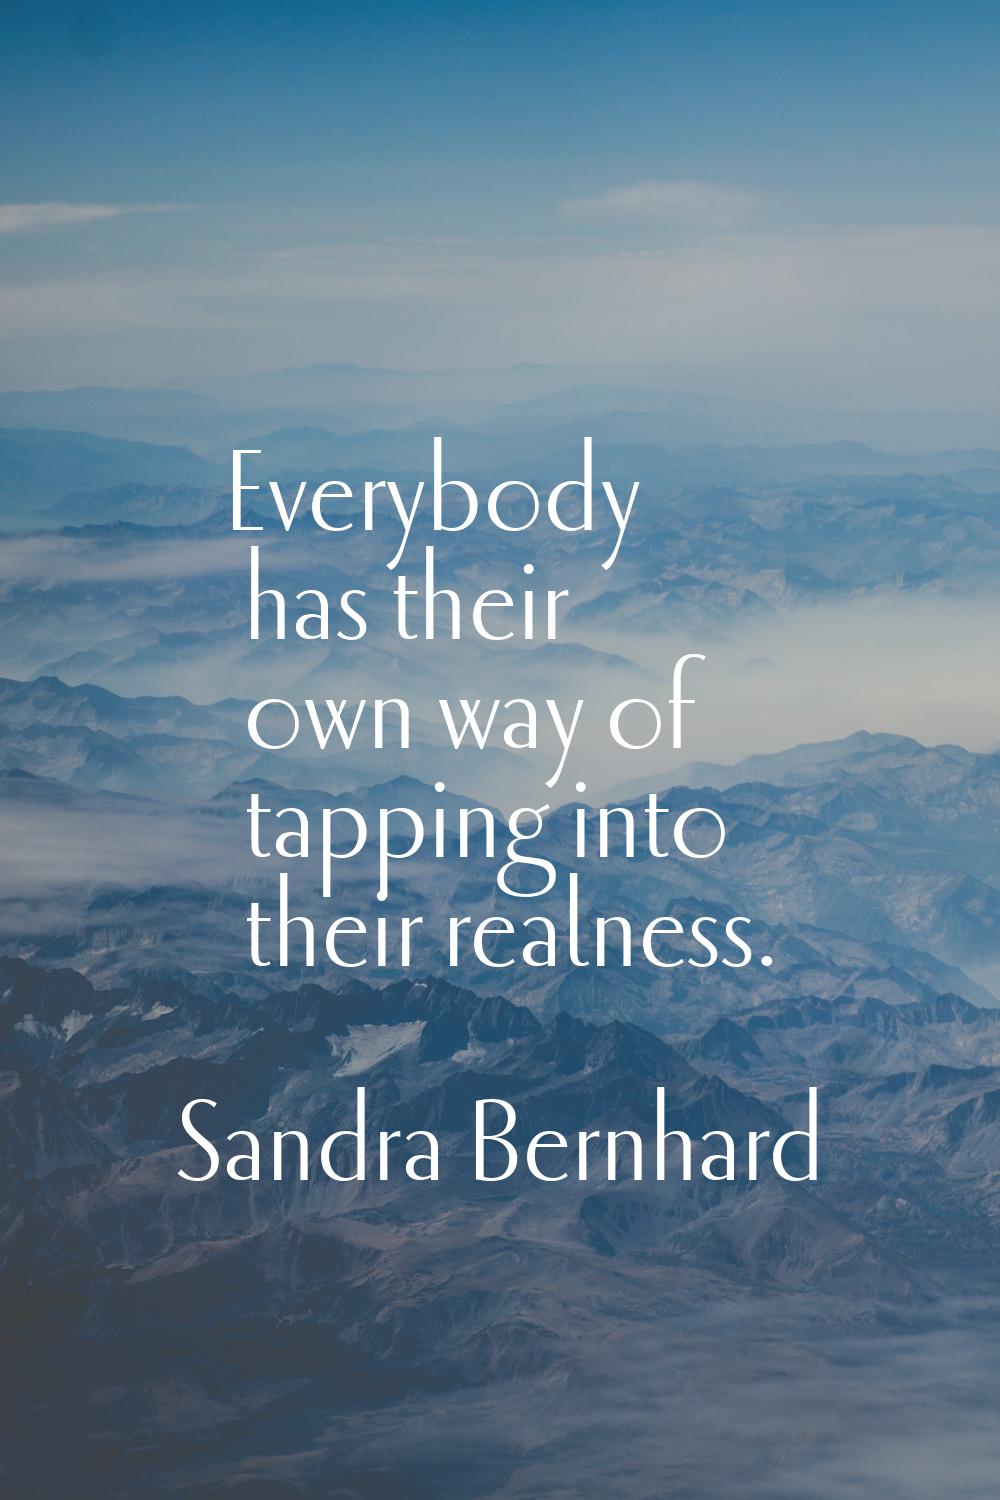 Everybody has their own way of tapping into their realness.